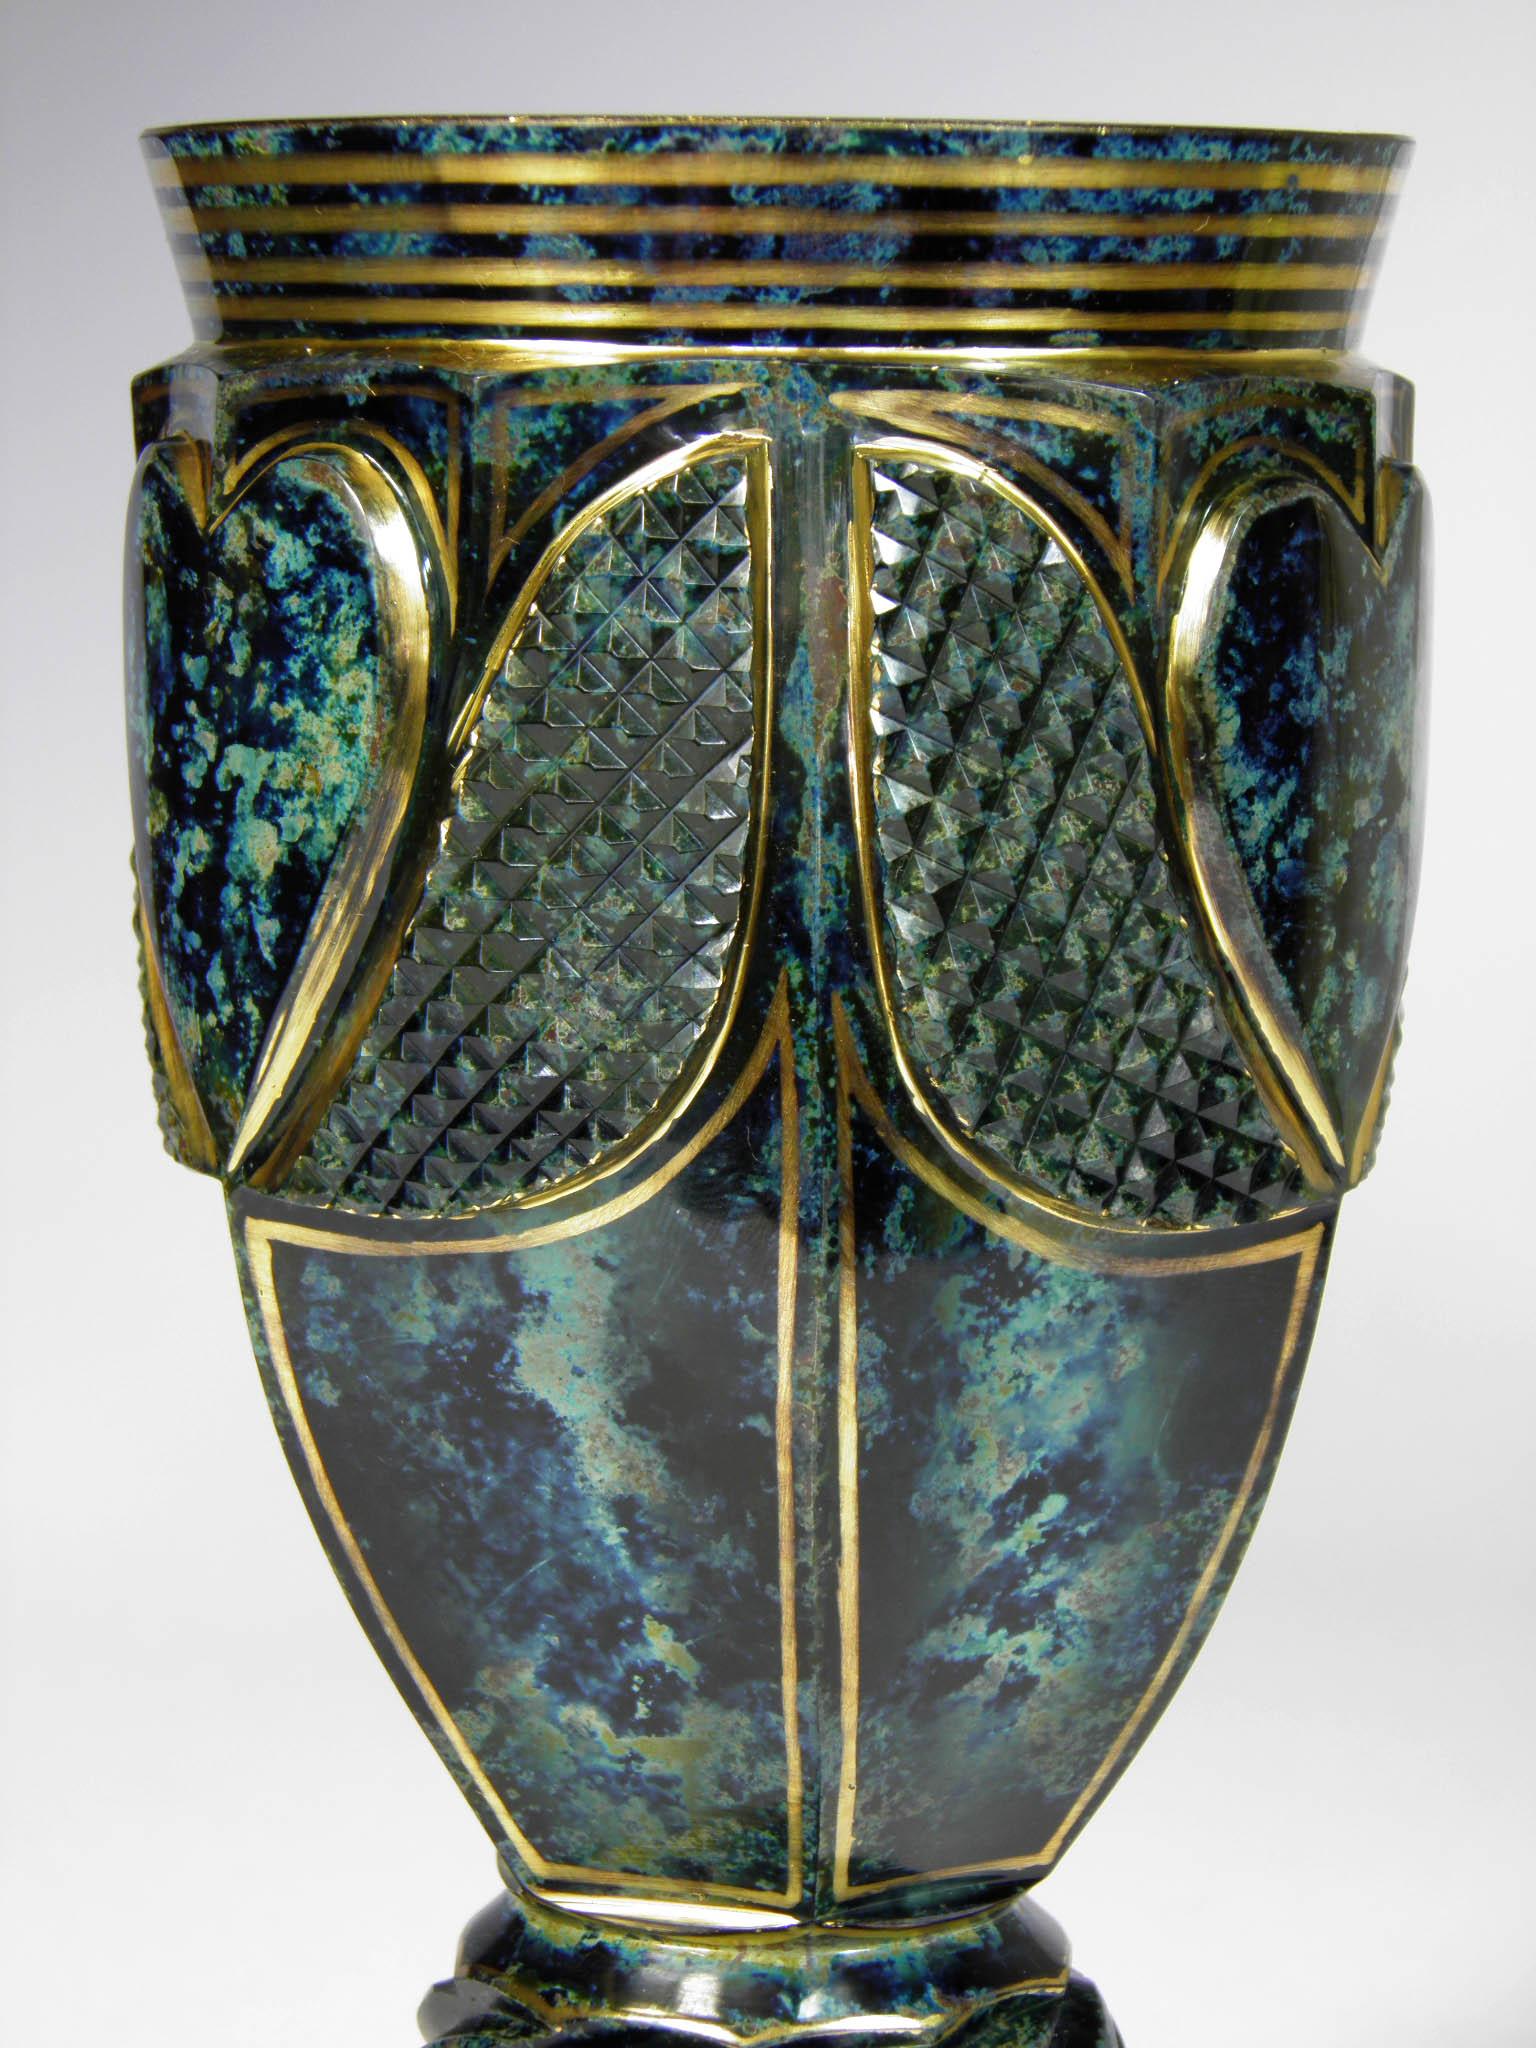 Late 19th Century Unique Marble Glass Goblet from Lithyalin around 1900 Bohemian Glass